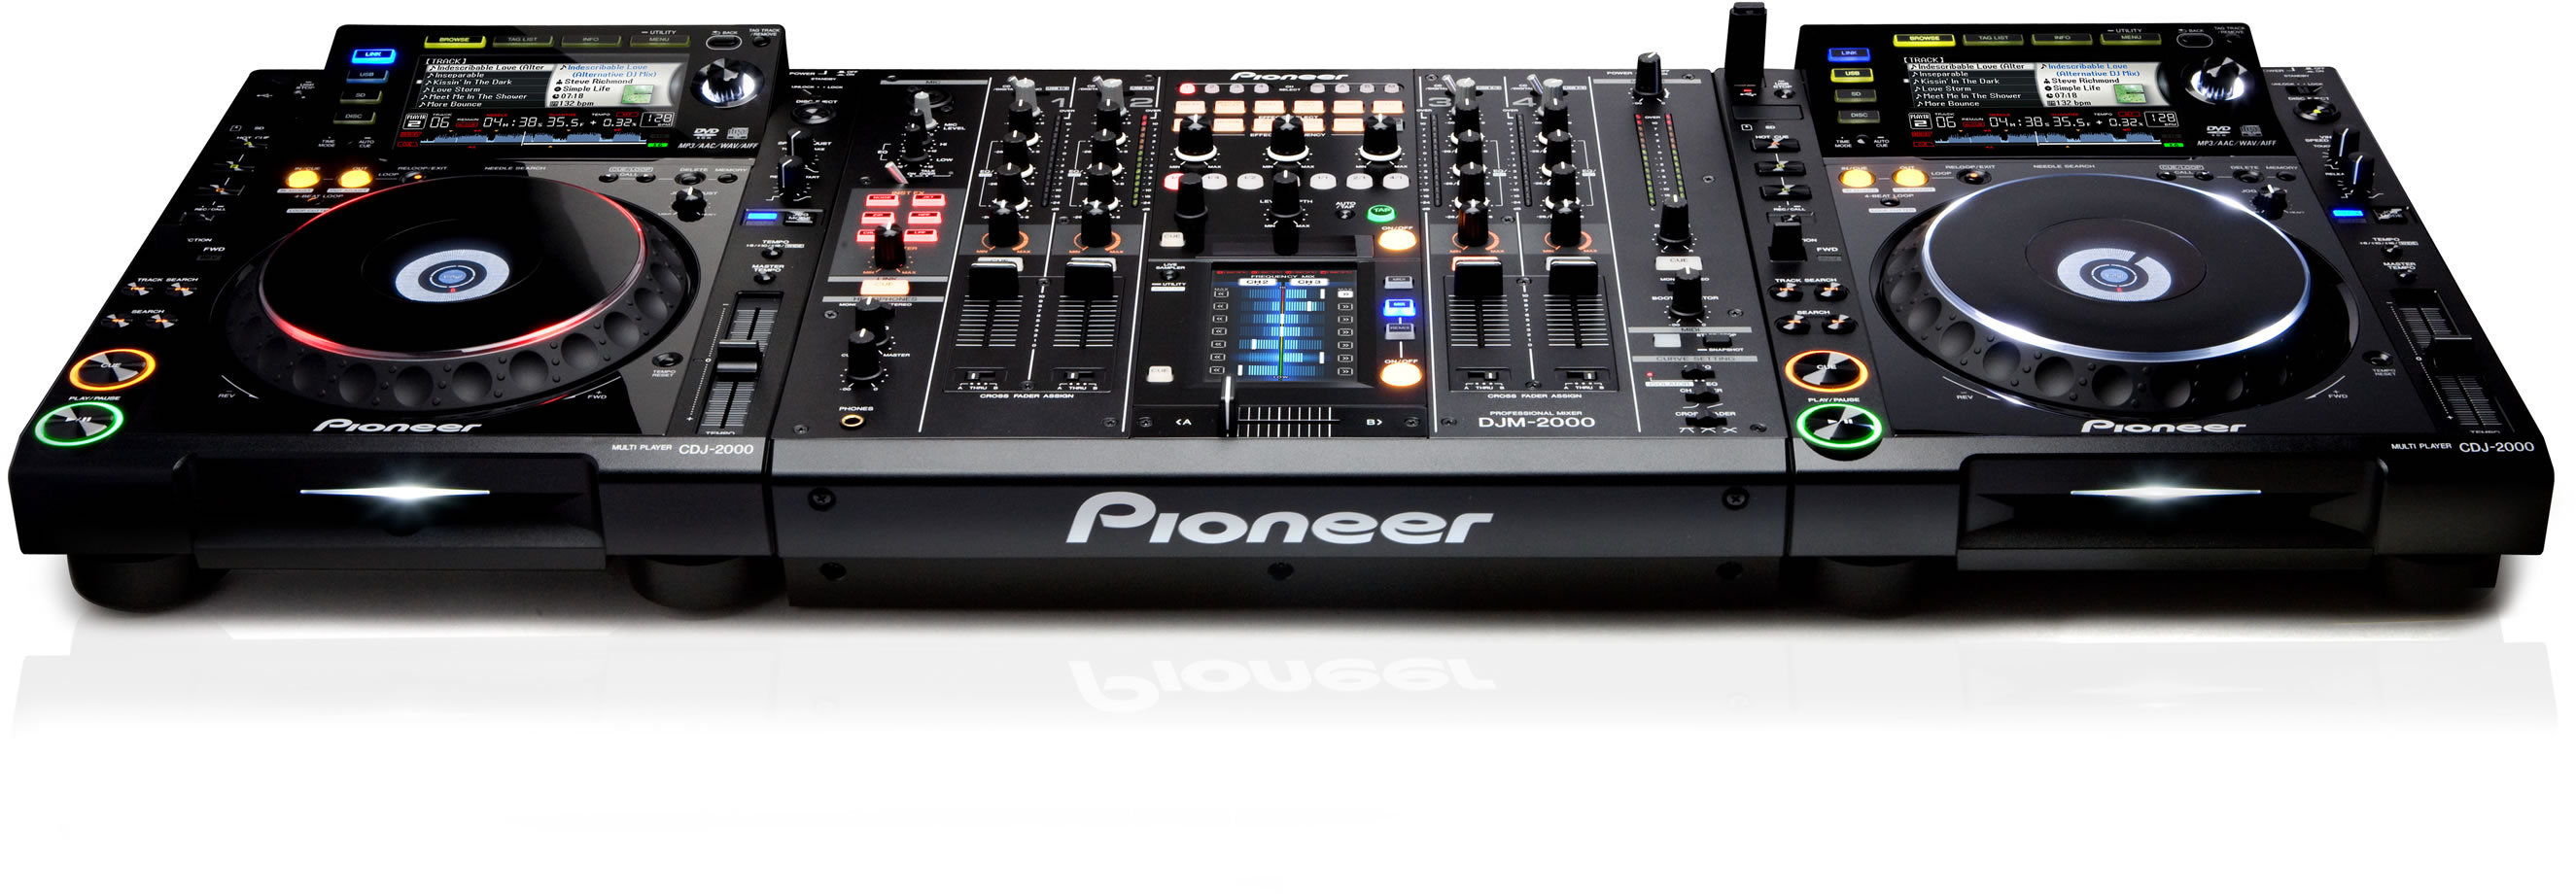 Download this Pioneer Djm Review picture